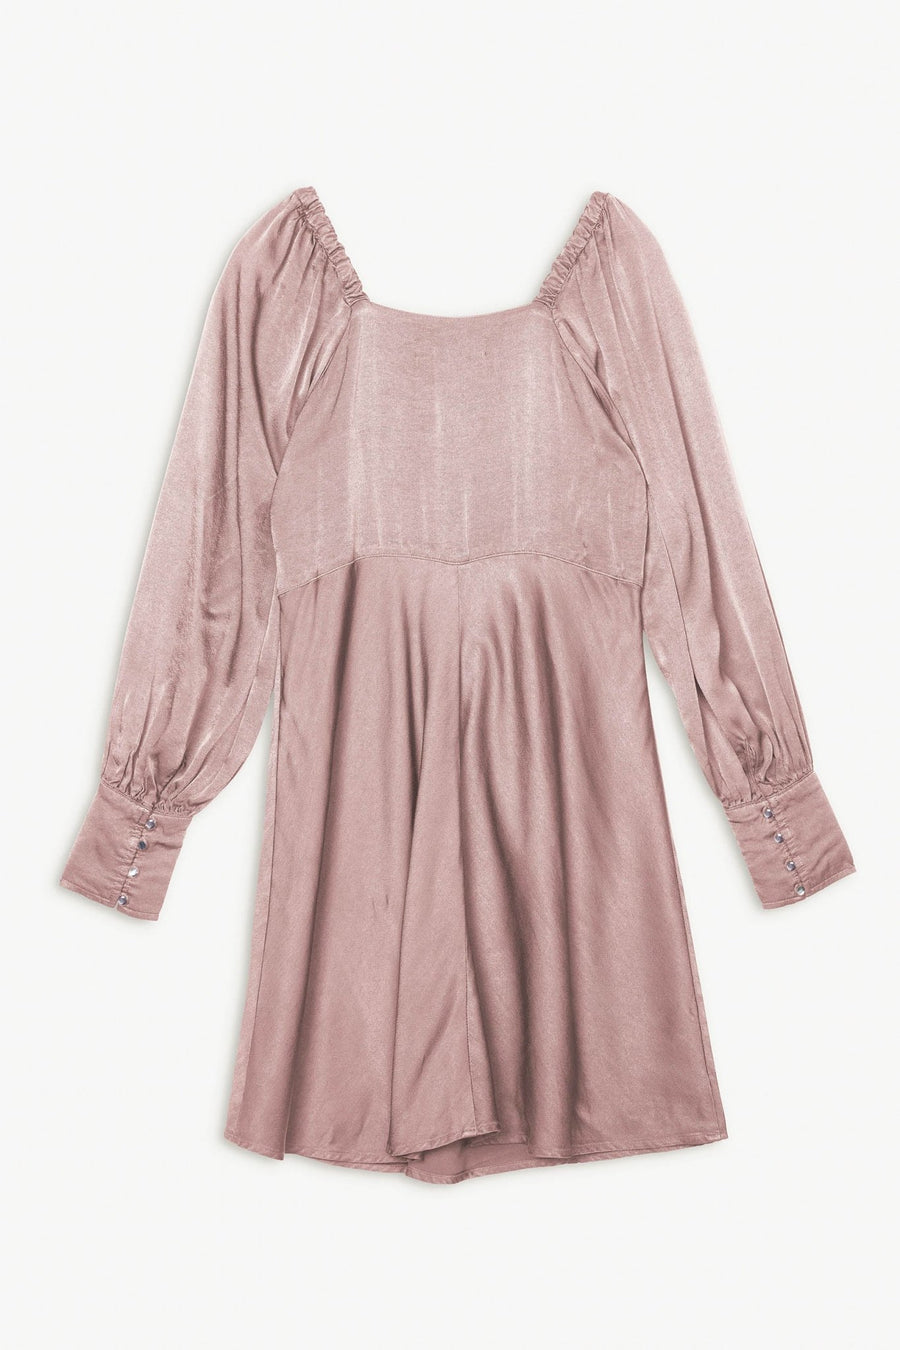 HANOVER ROMANTIC DRESS, ORCHID - Burning Torch Online Boutique